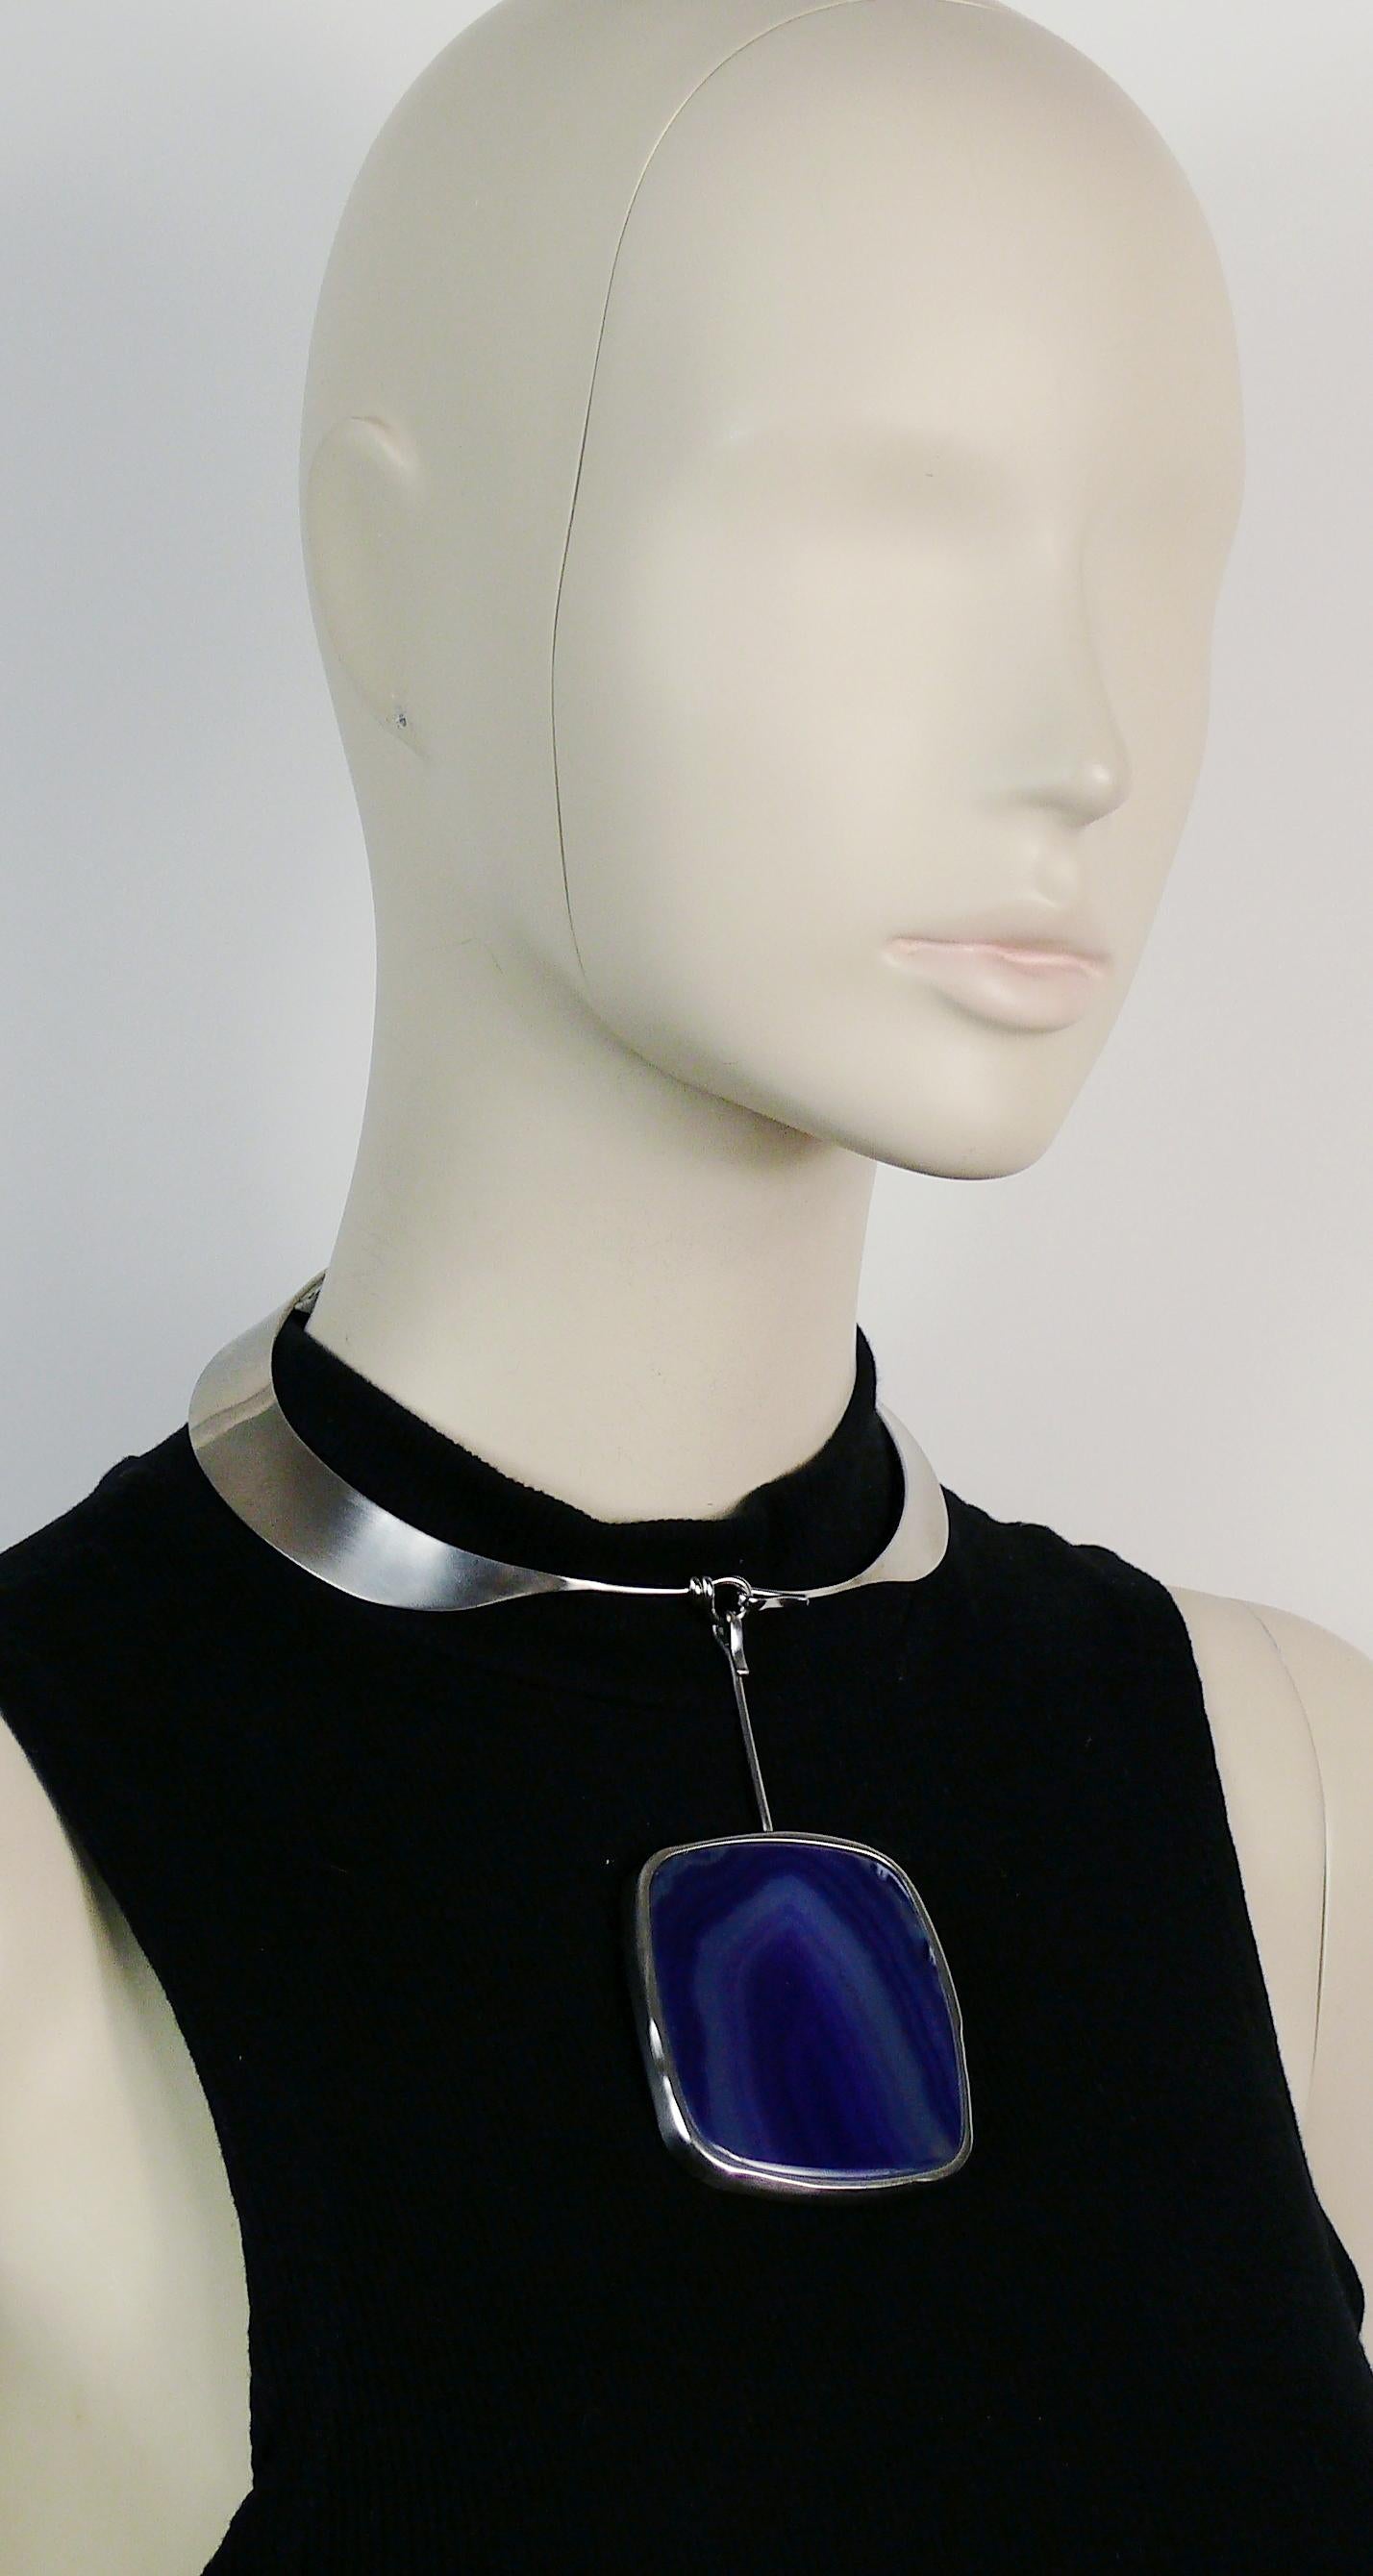 Chanel Modernist Choker Necklace with Agate Pendant In Excellent Condition For Sale In Nice, FR